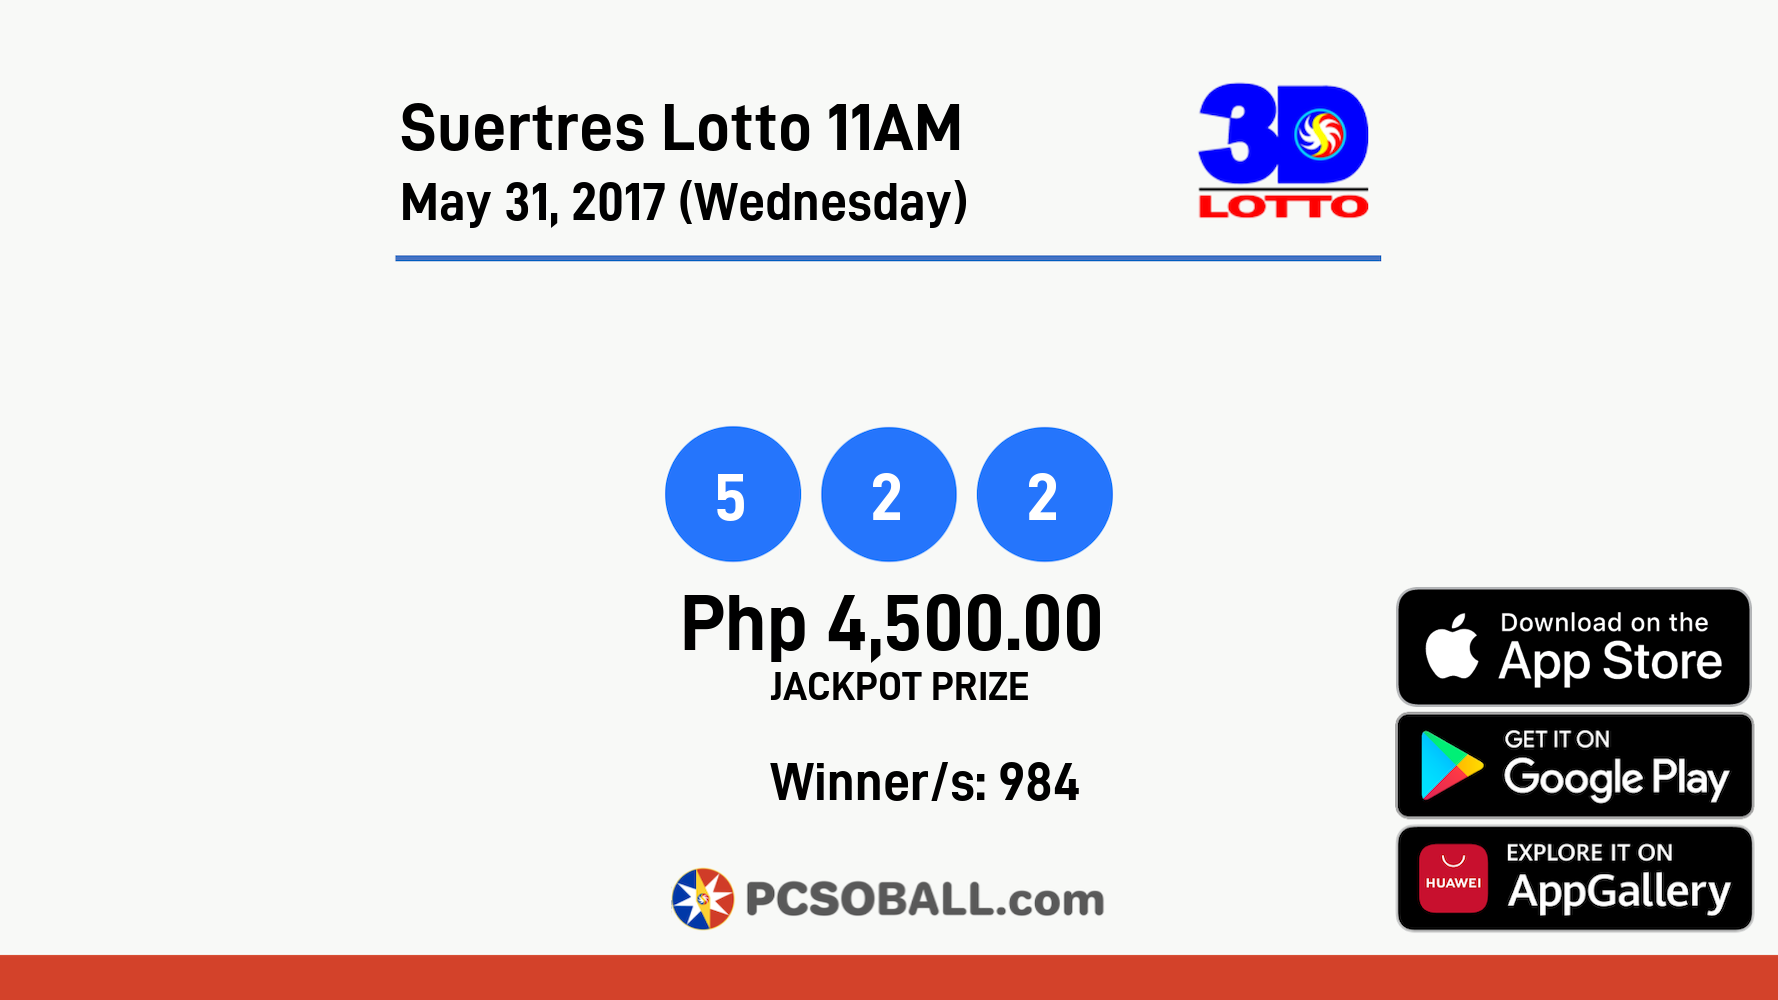 Suertres Lotto 11AM May 31, 2017 (Wednesday) Result